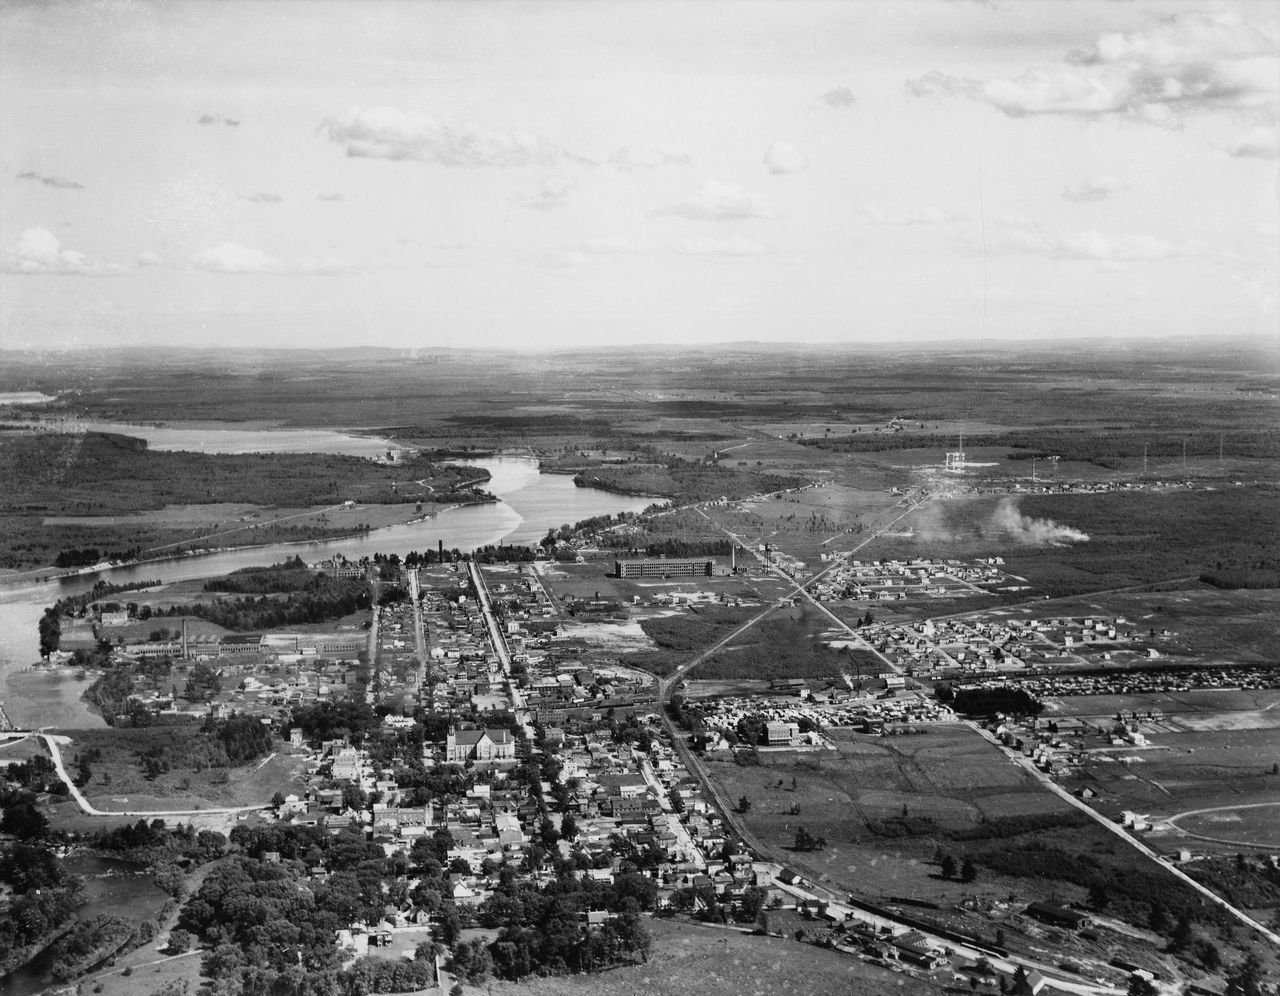 Black and white photograph showing an aerial view of downtown Drummondville. It shows houses, churches, factories, roads, and railways.